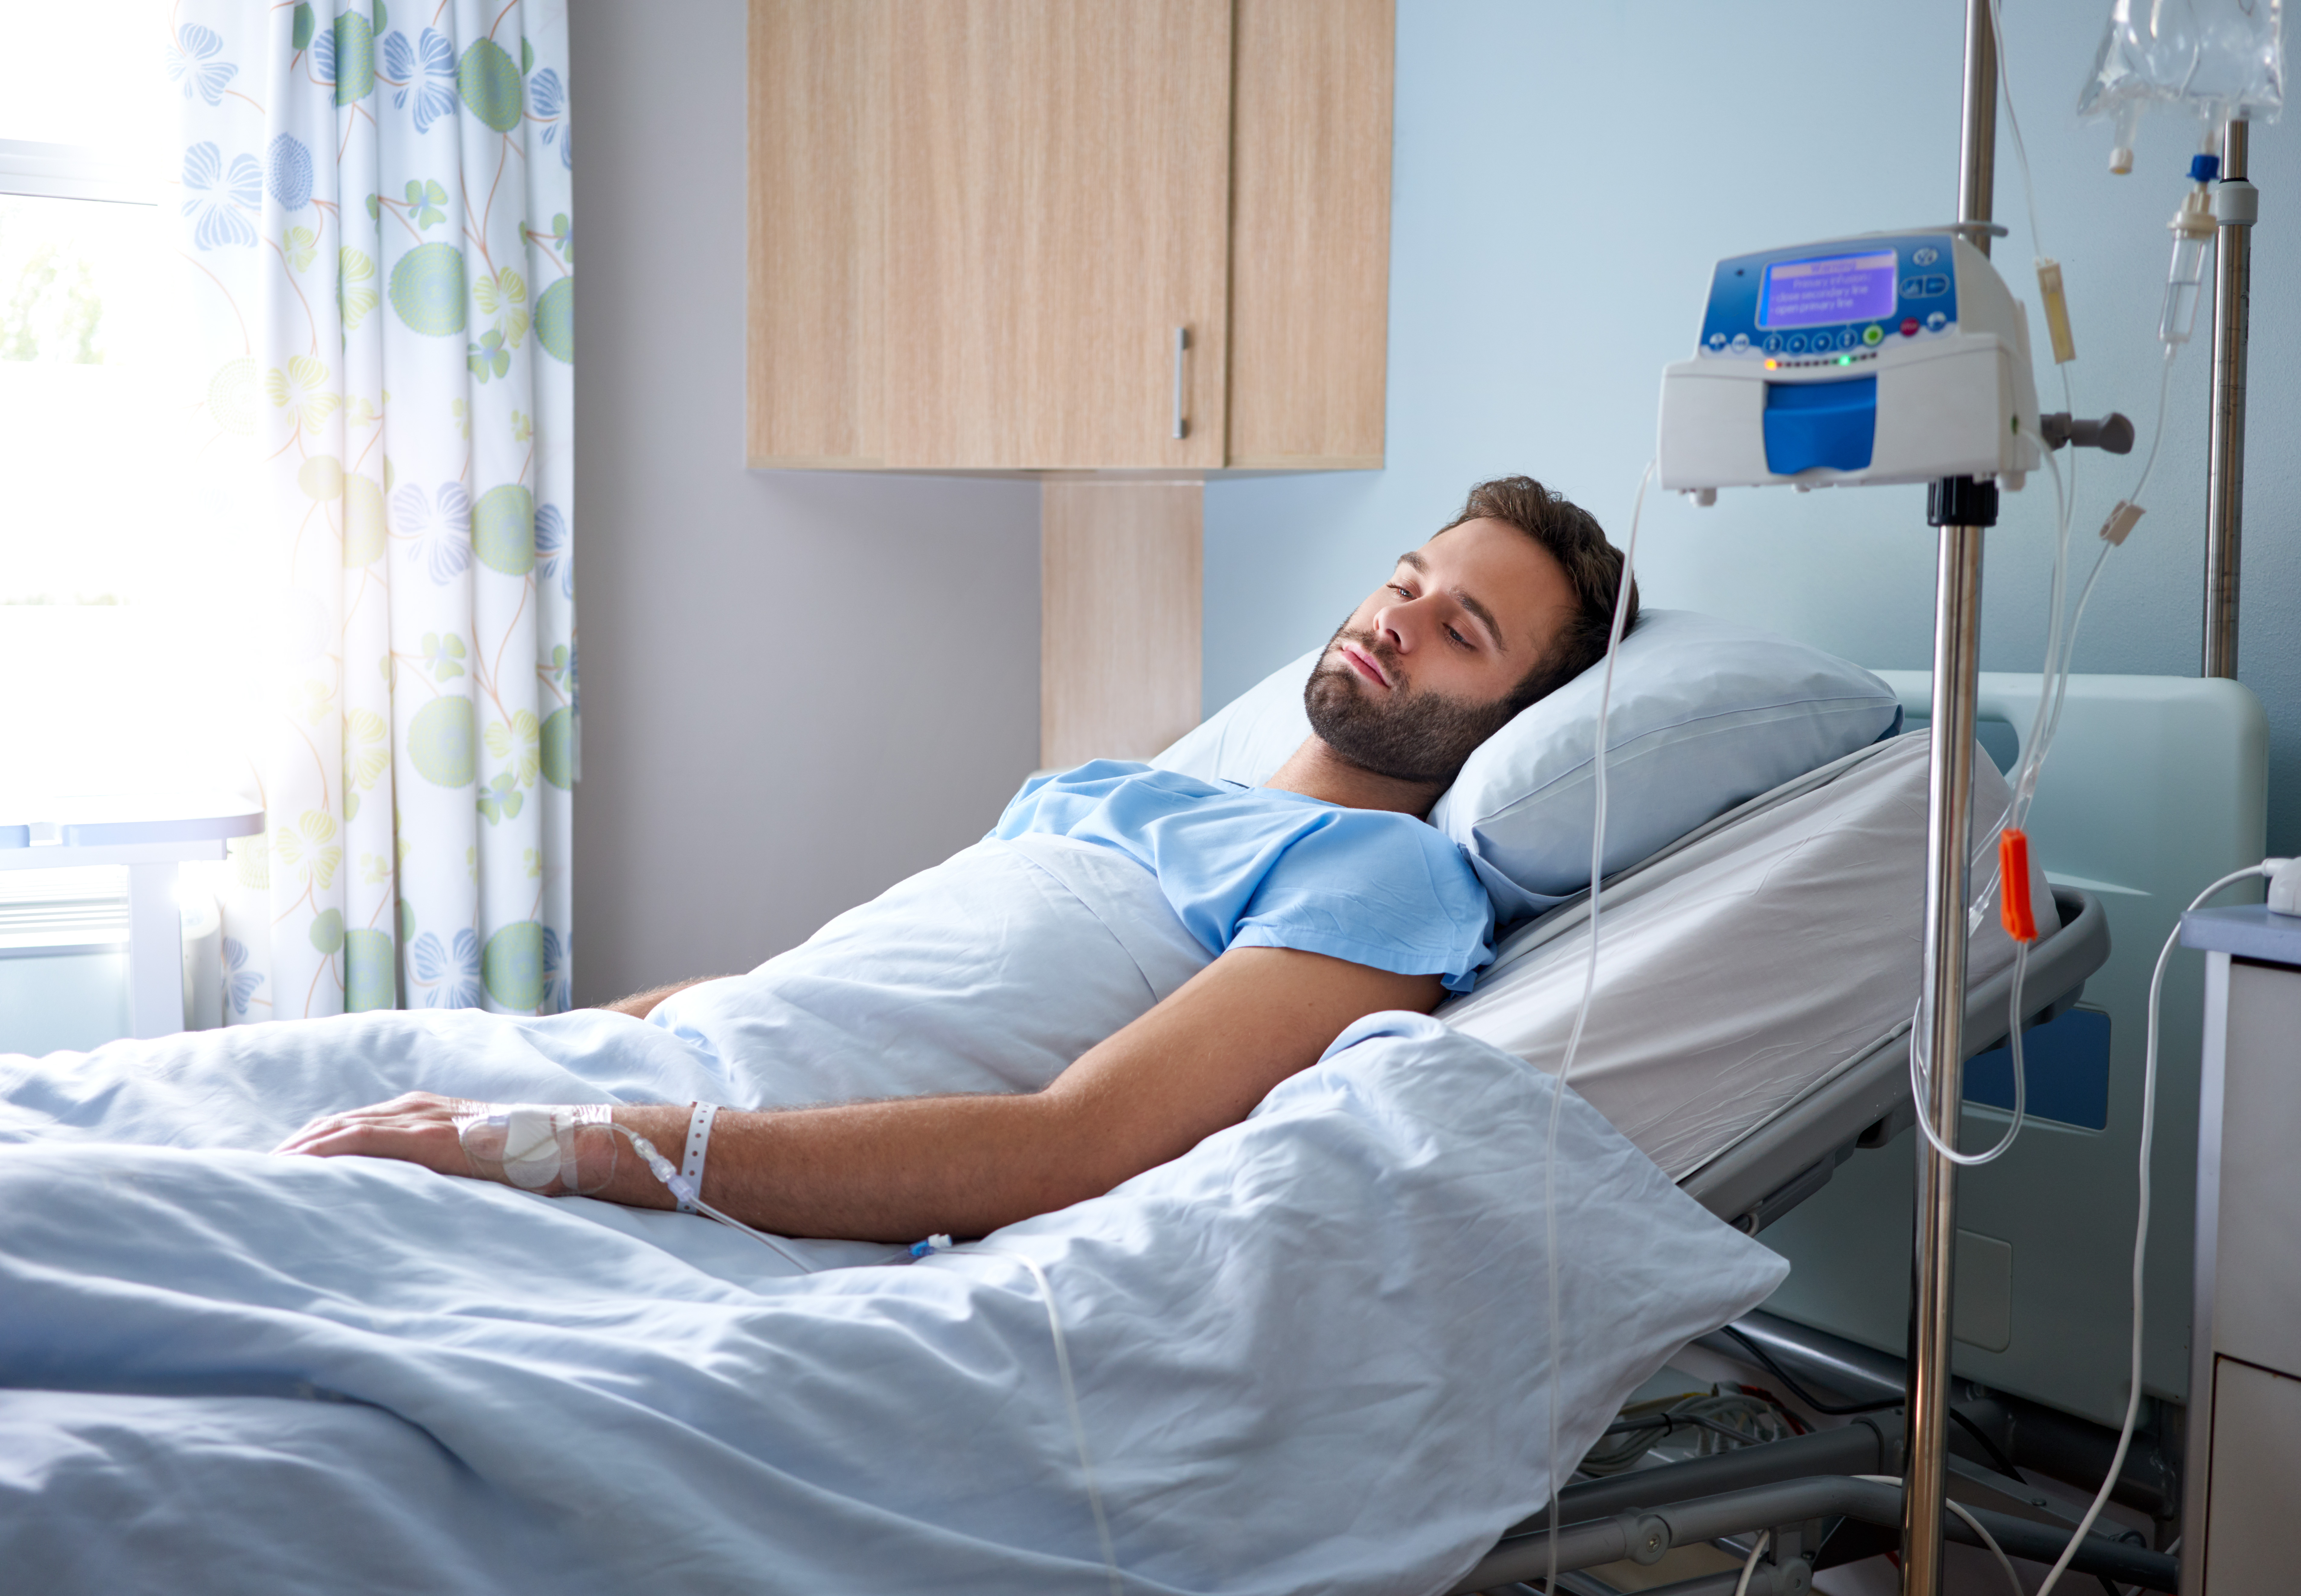 A man in a hospital bed | Source: Shutterstock